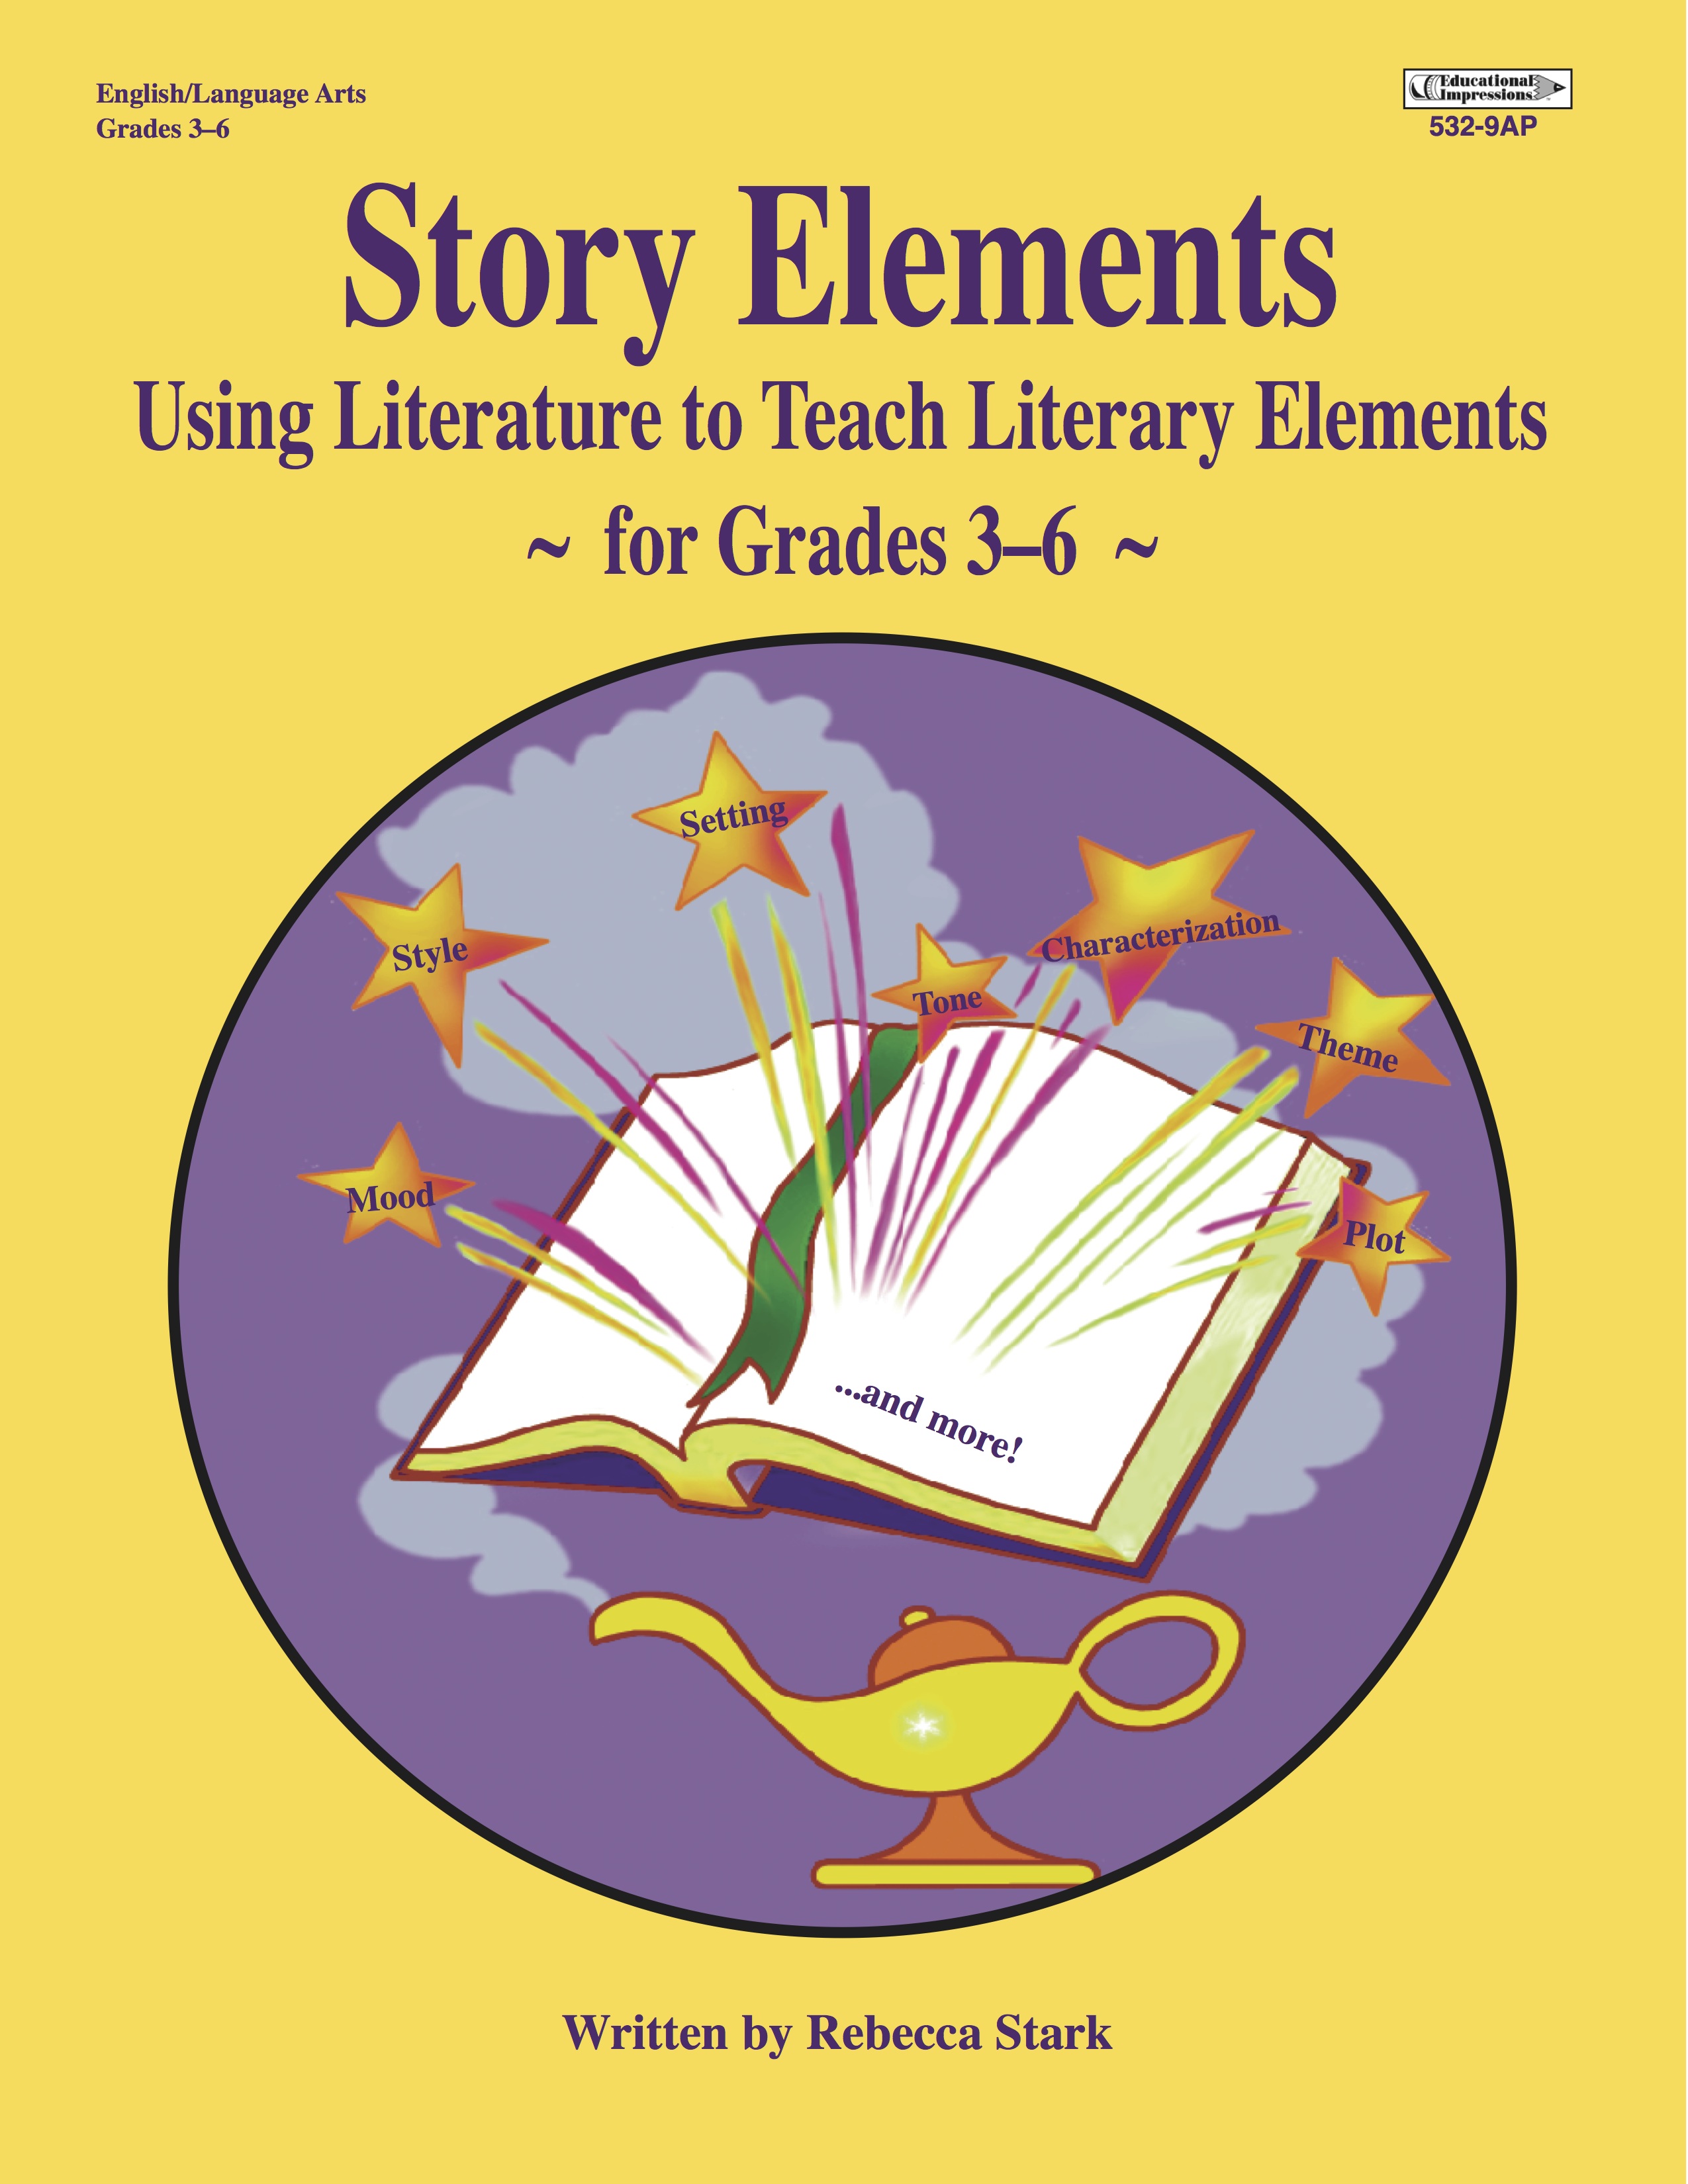 Story Elements: Understanding Literary Terms and Devices, Grades 36 (532-9AP)